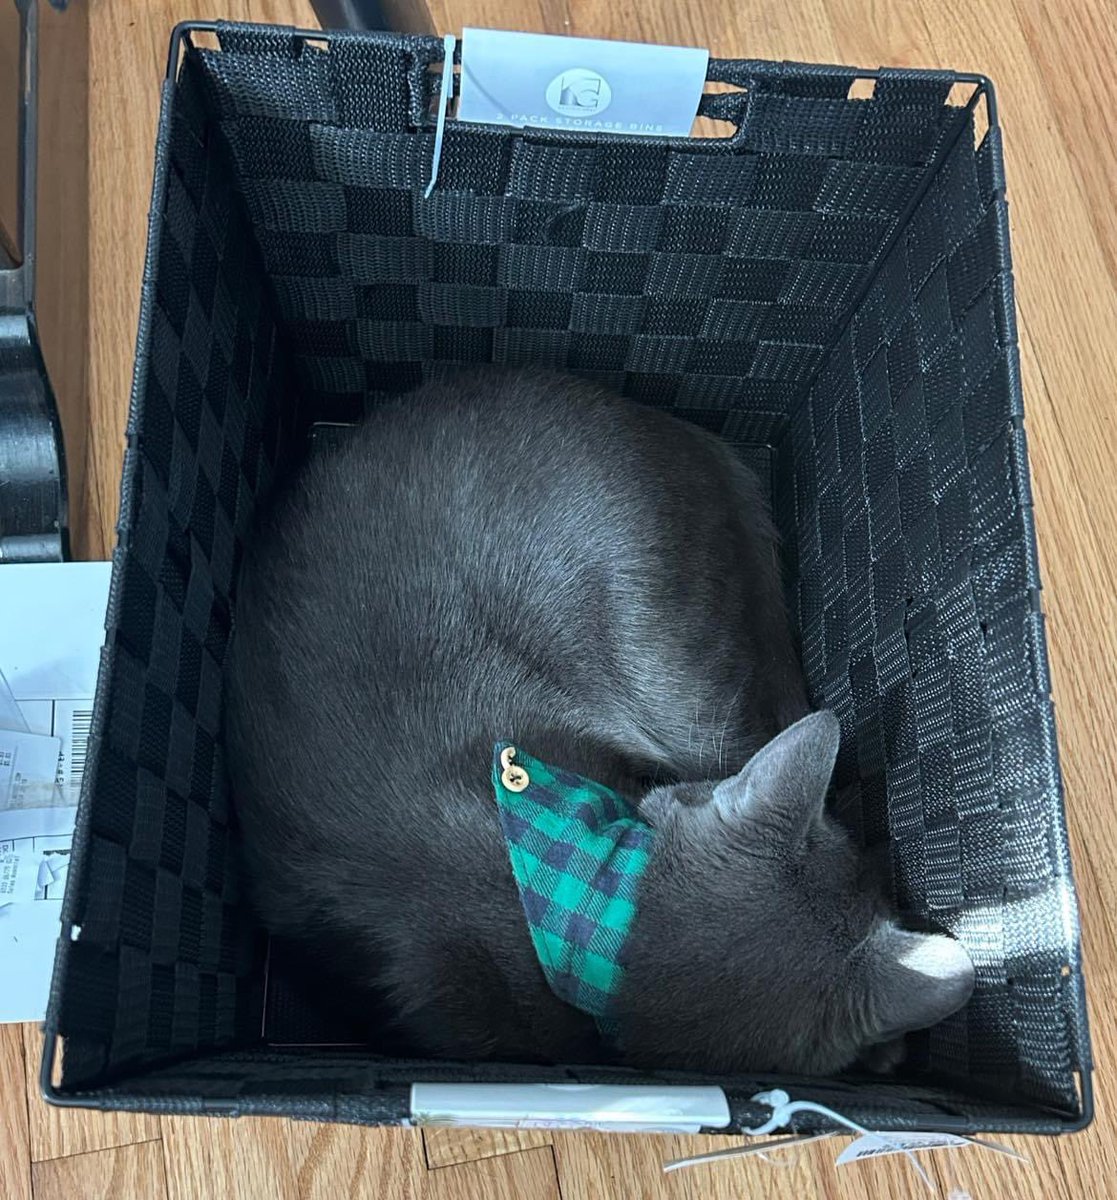 If I fits, I sits. - Squirt #CatsOfX #kitty #graycats #ififitsisits #SILLYCAT